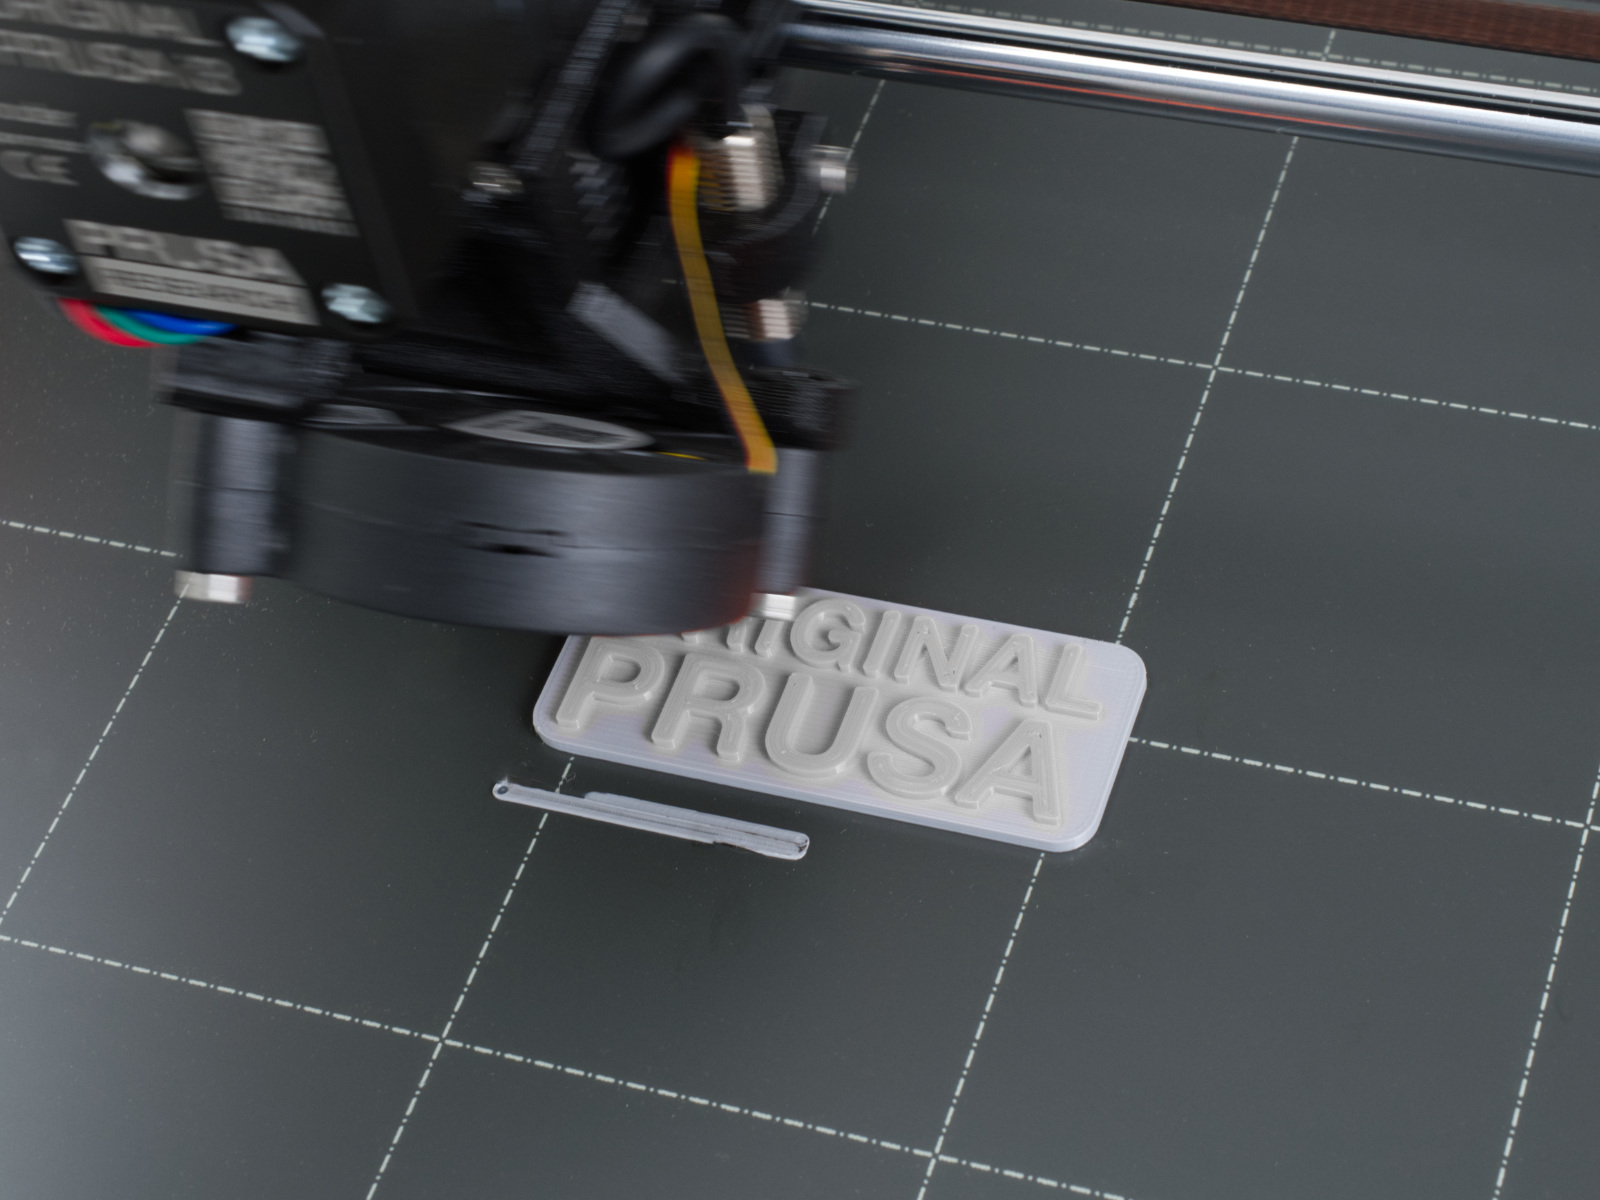 Print your first model